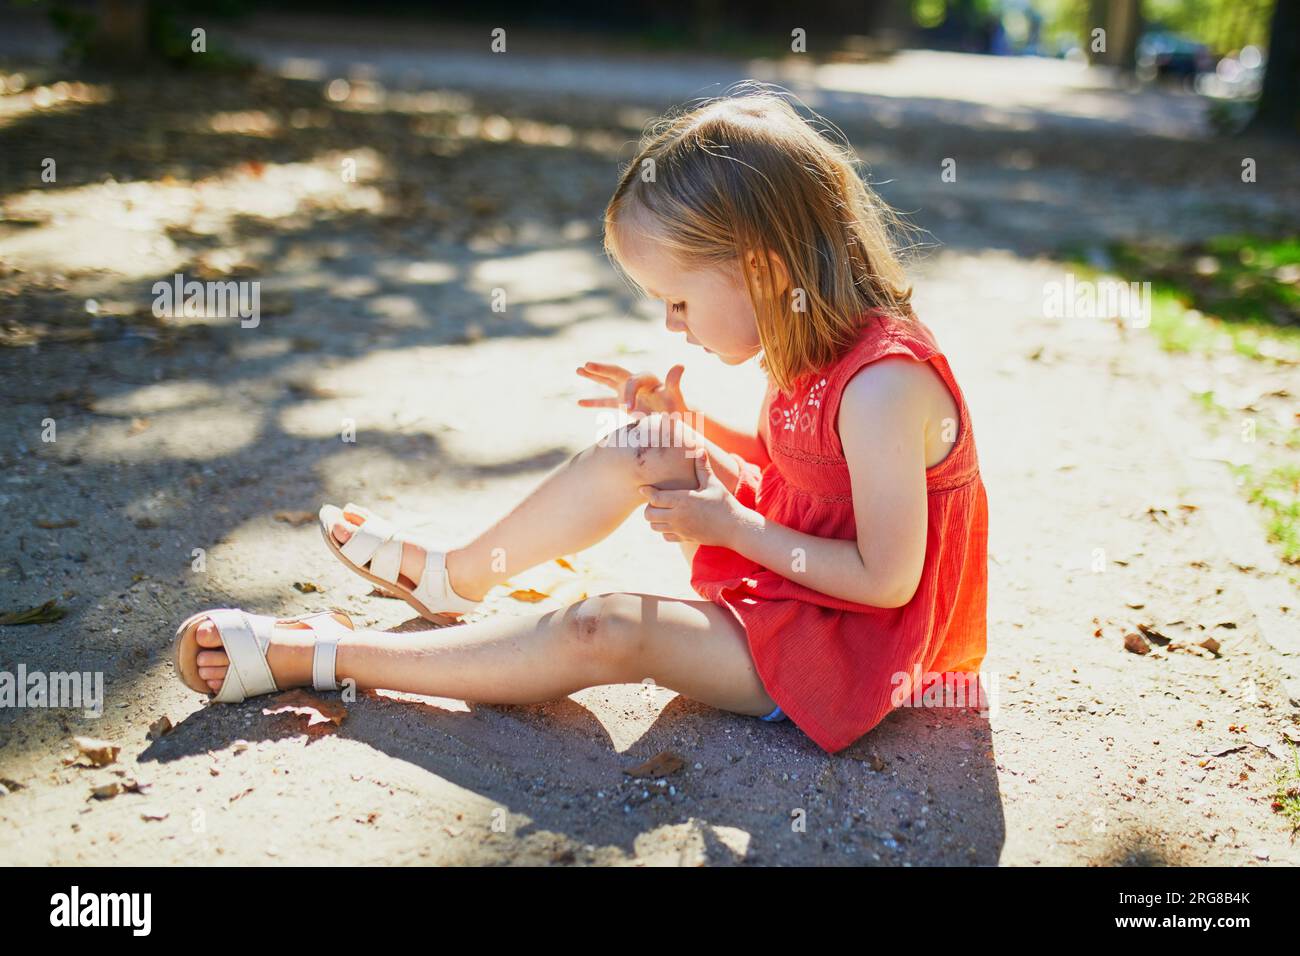 Cute little girl sitting on the ground after falling down. Child getting hurt while walking in park. Kid looking at her boo-boo Stock Photo